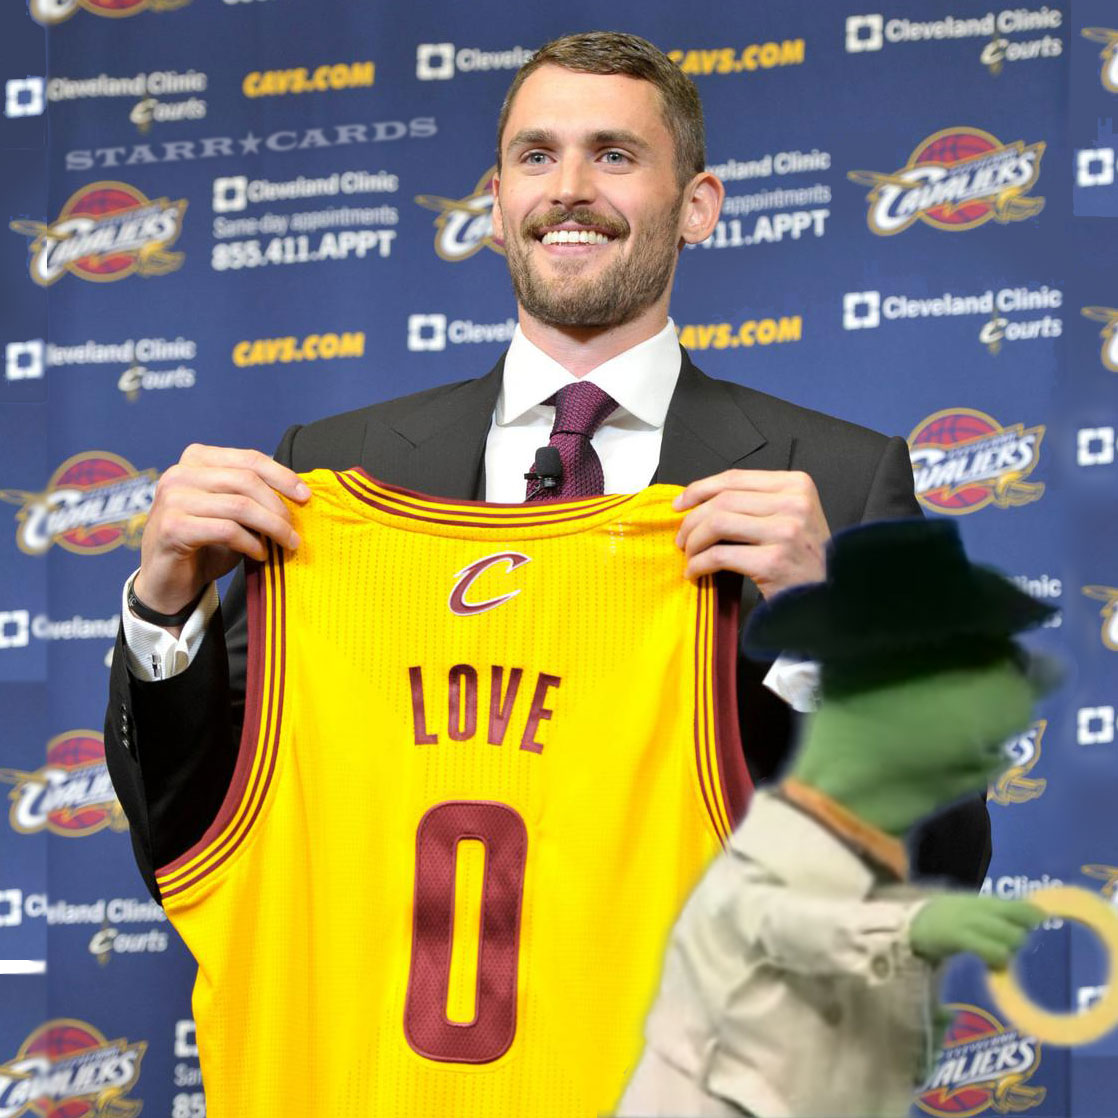 Was Kevin Love suckered into buying an "O"?